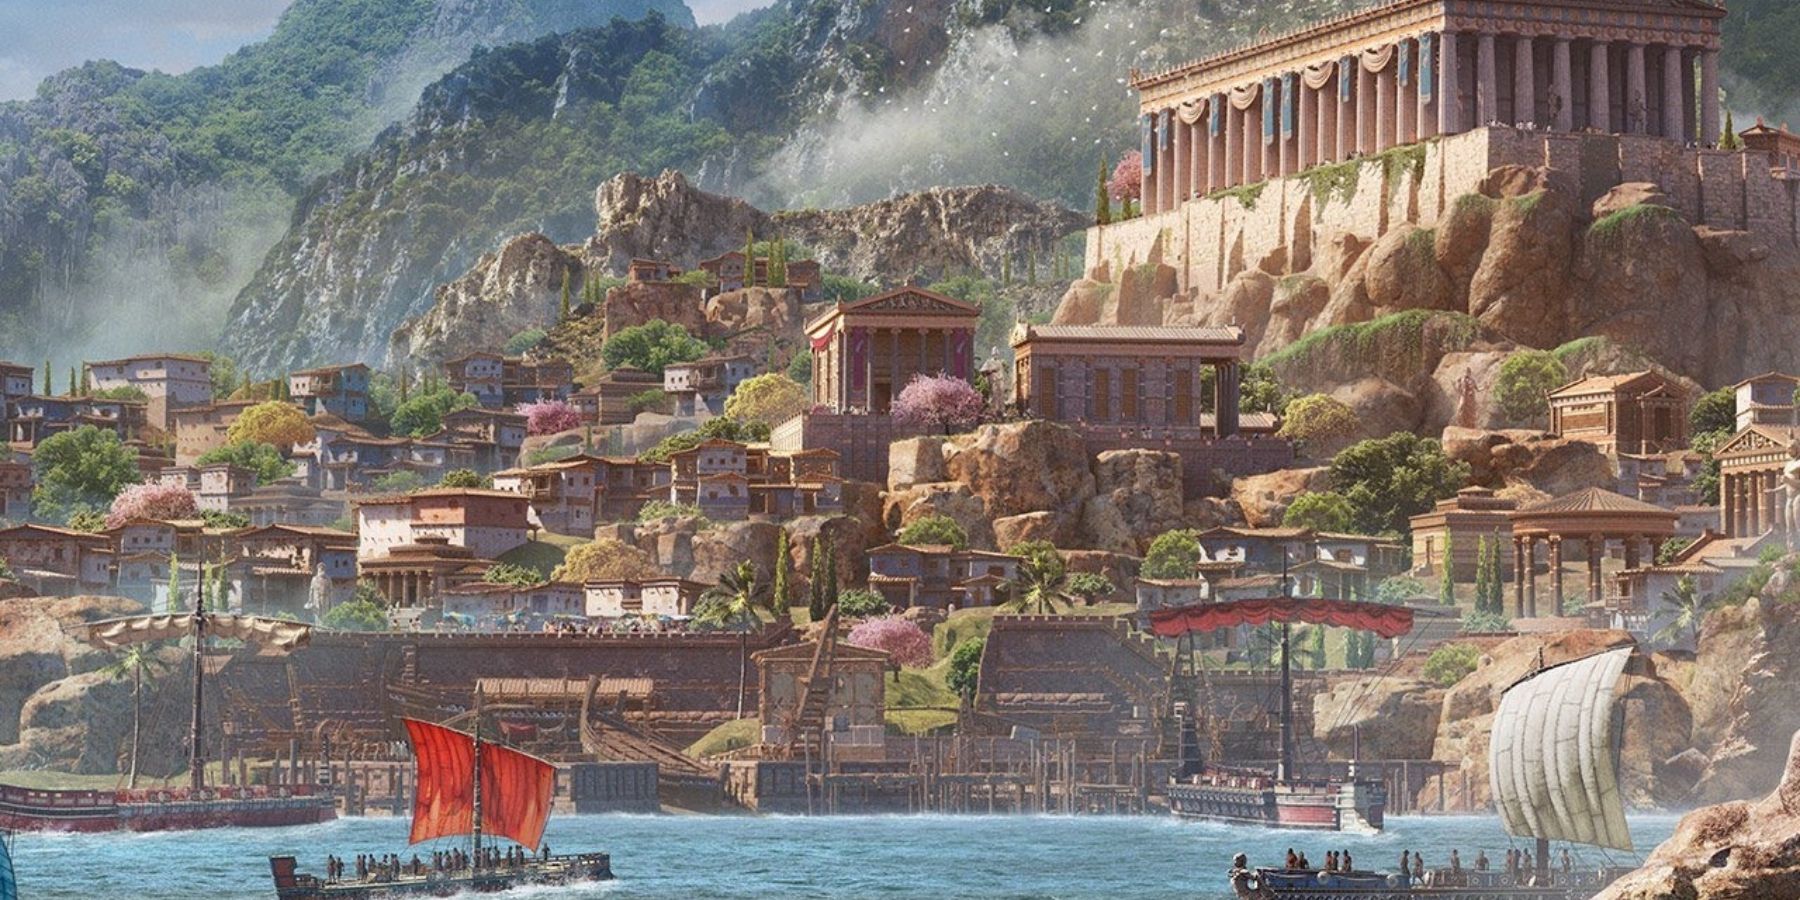 The city of Athens in Assassin's Creed Odyssey